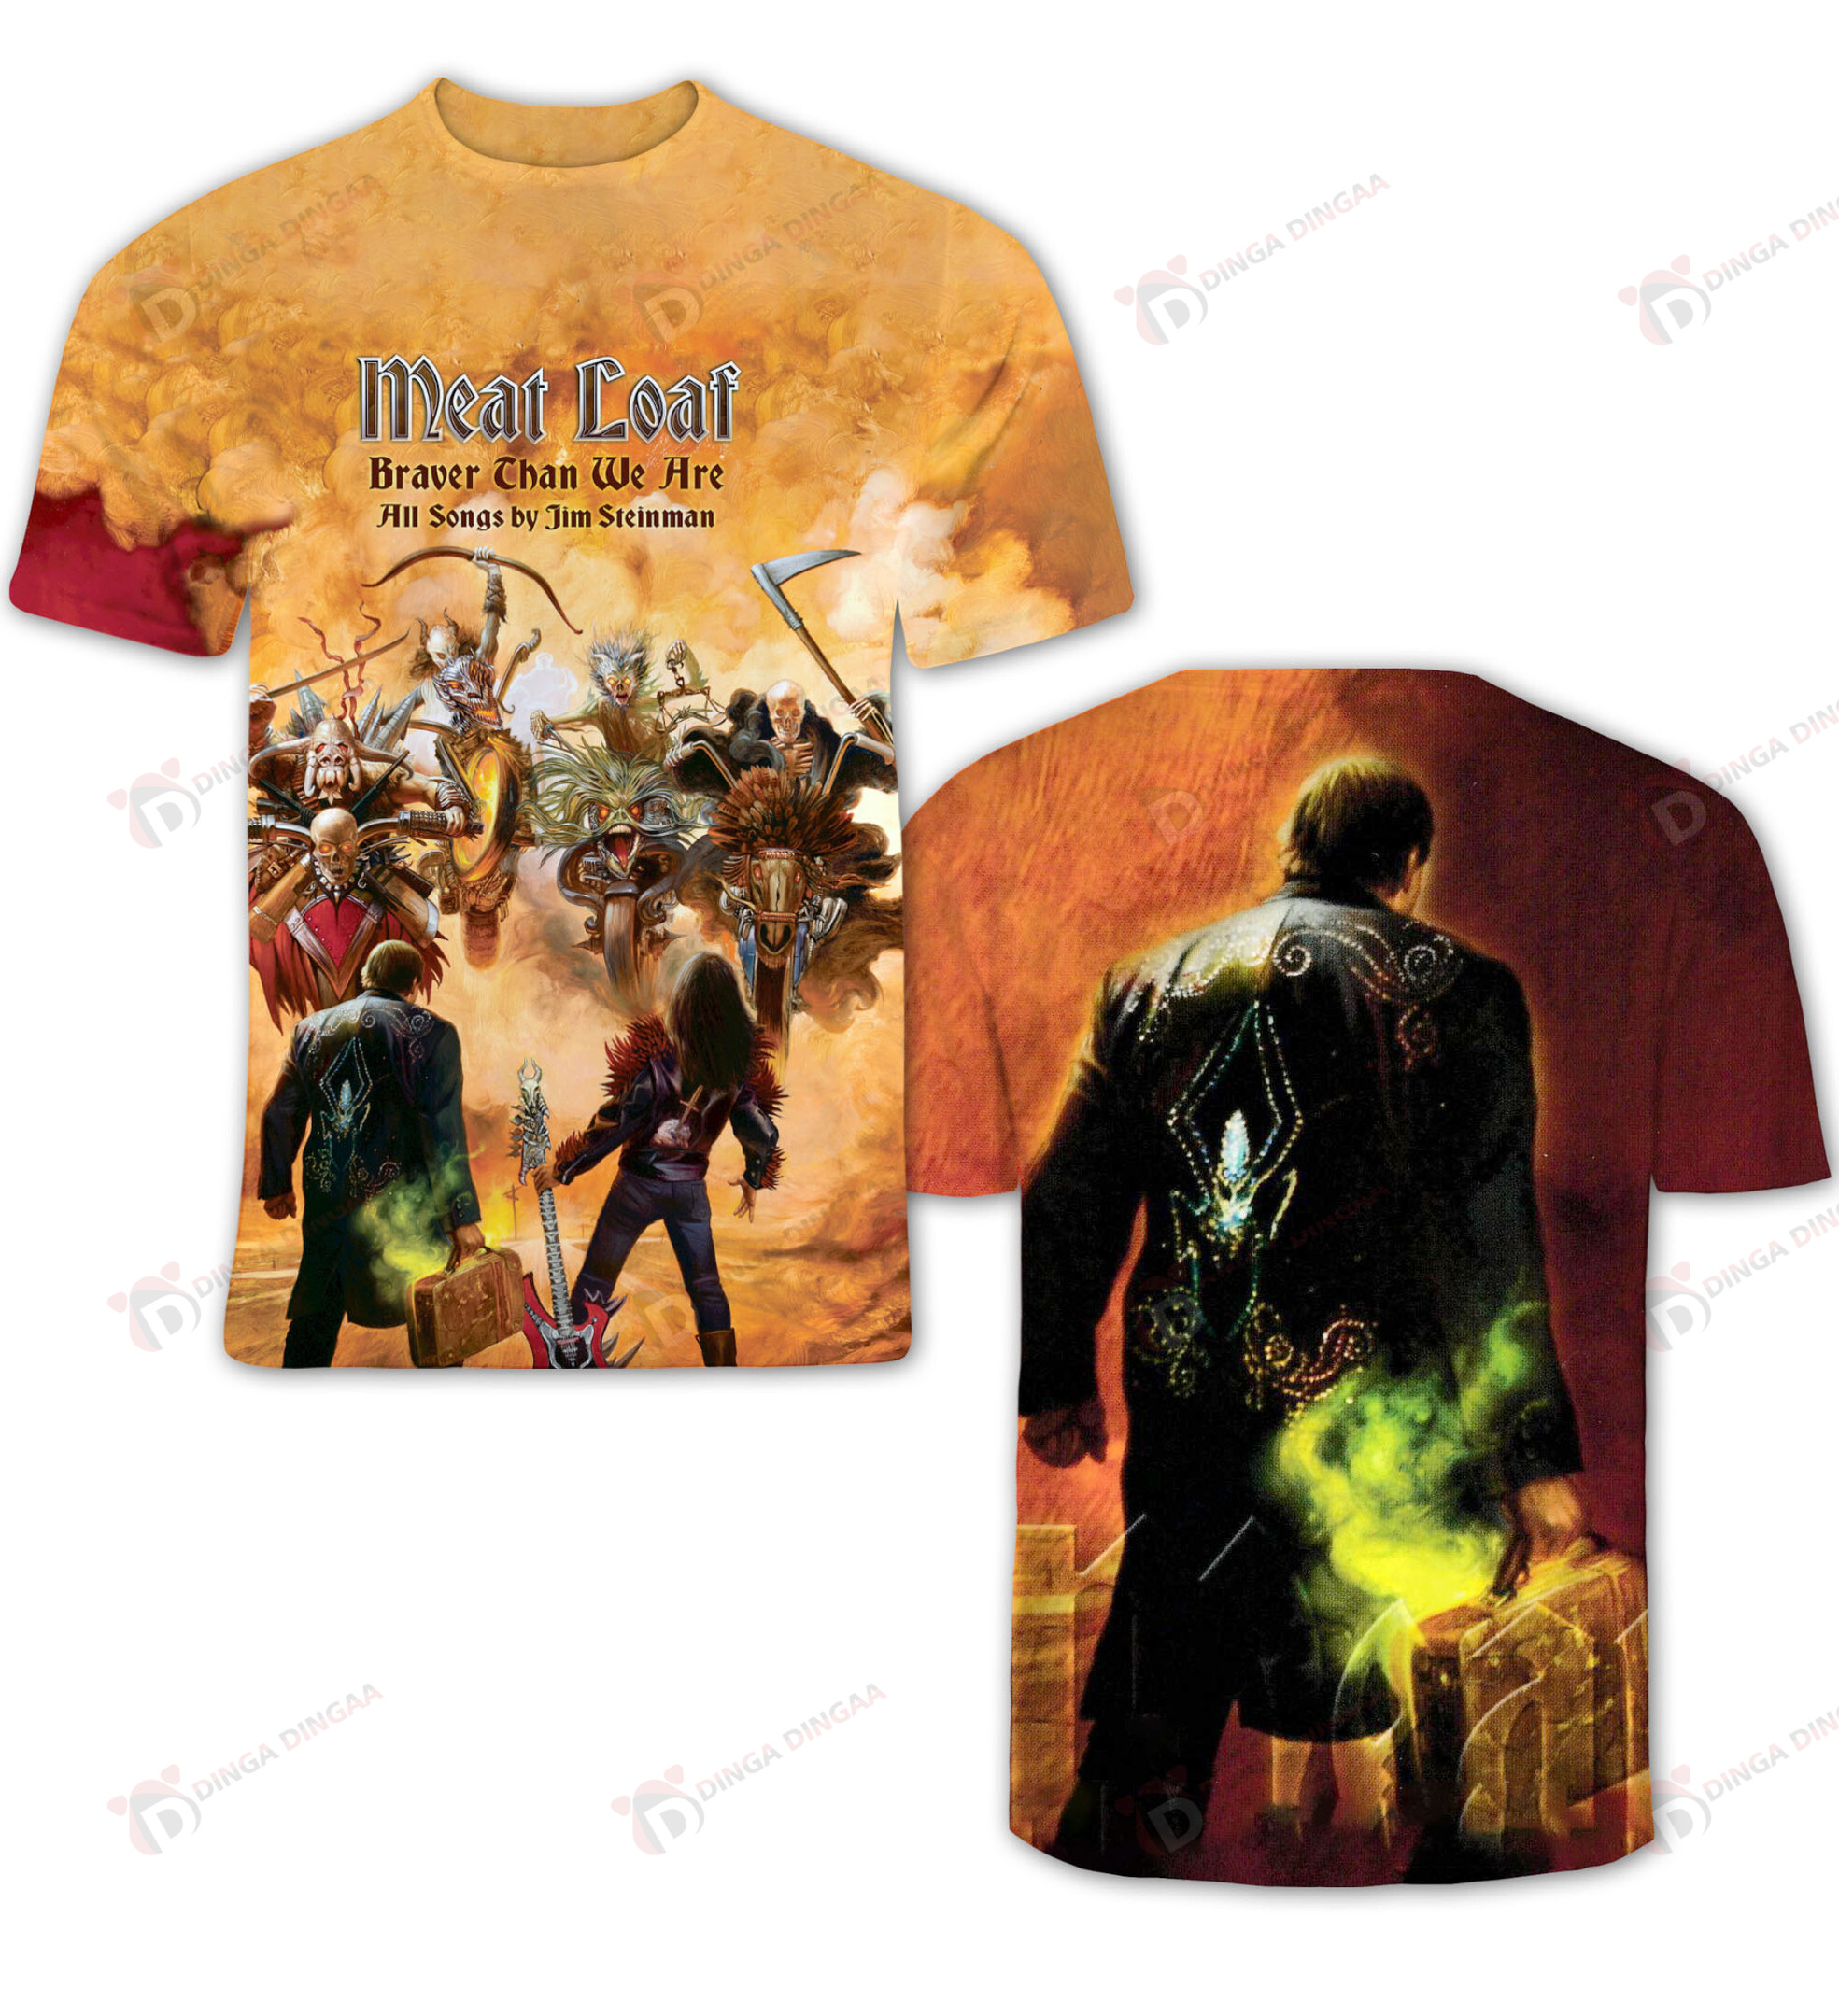 Let's take a look at these hot T-Shirt 19